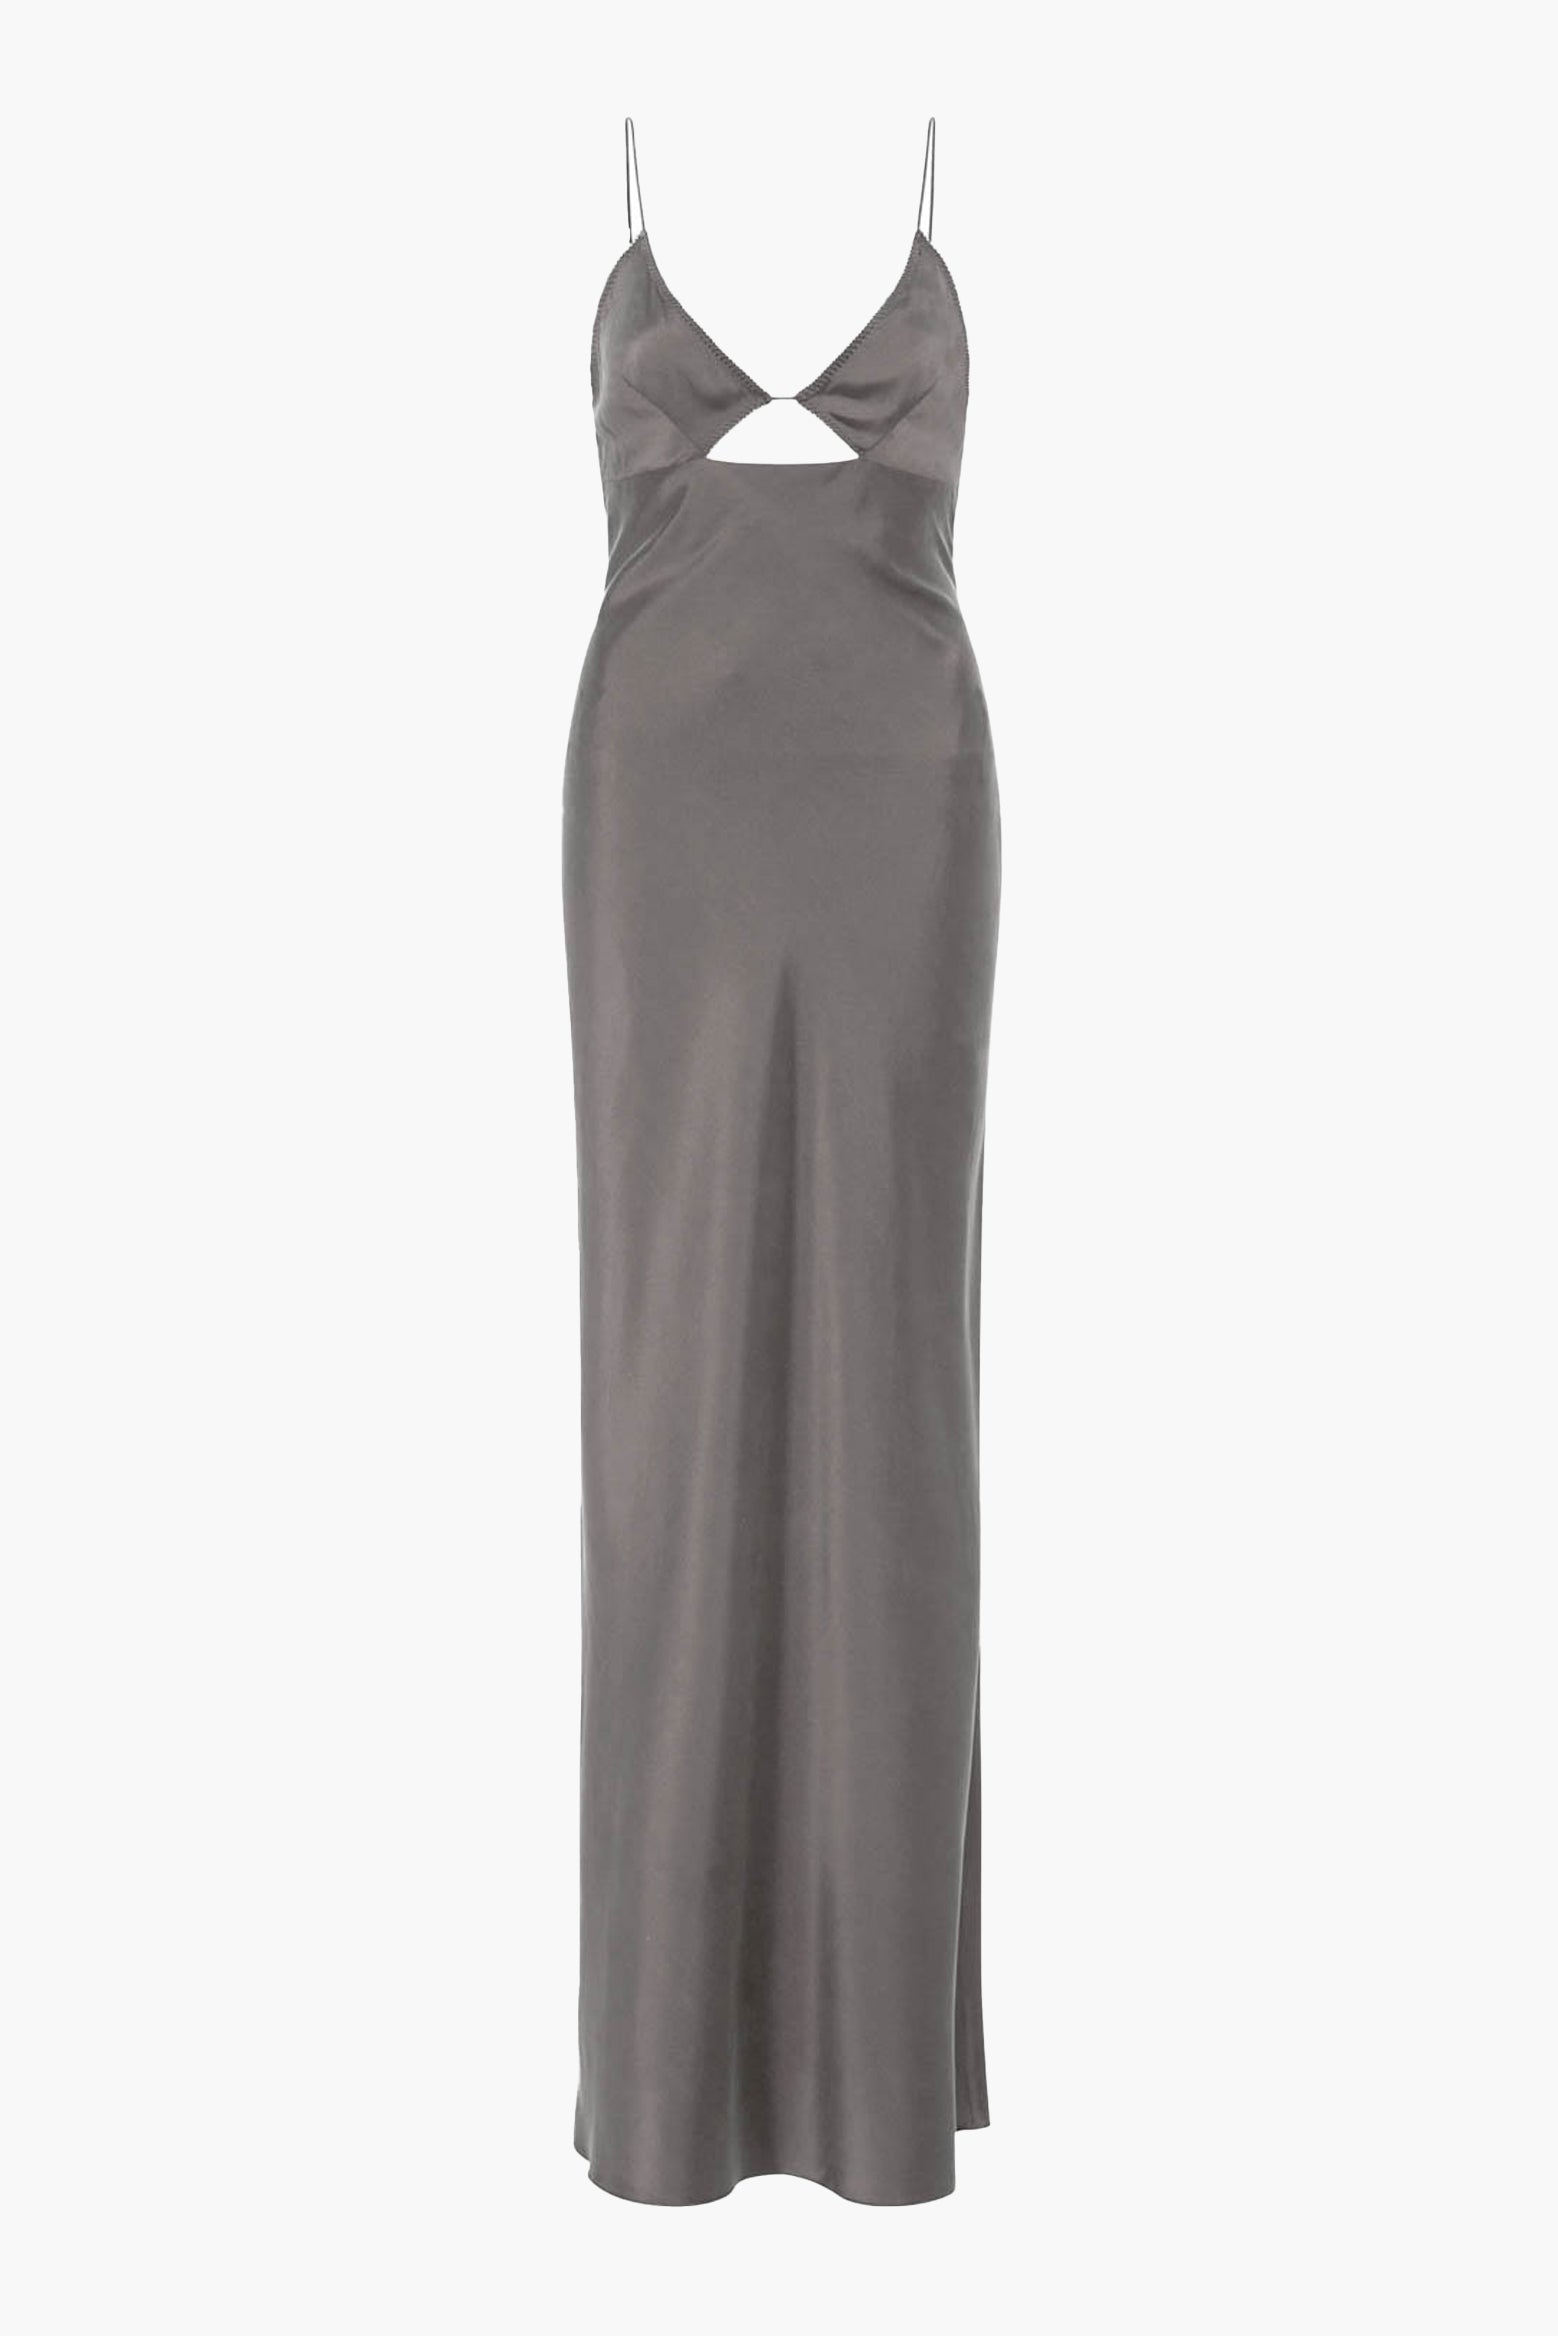 St Agni Soft Silk Bra Bias Slip Dress in Pewter Grey available at The New Trend Australia. 